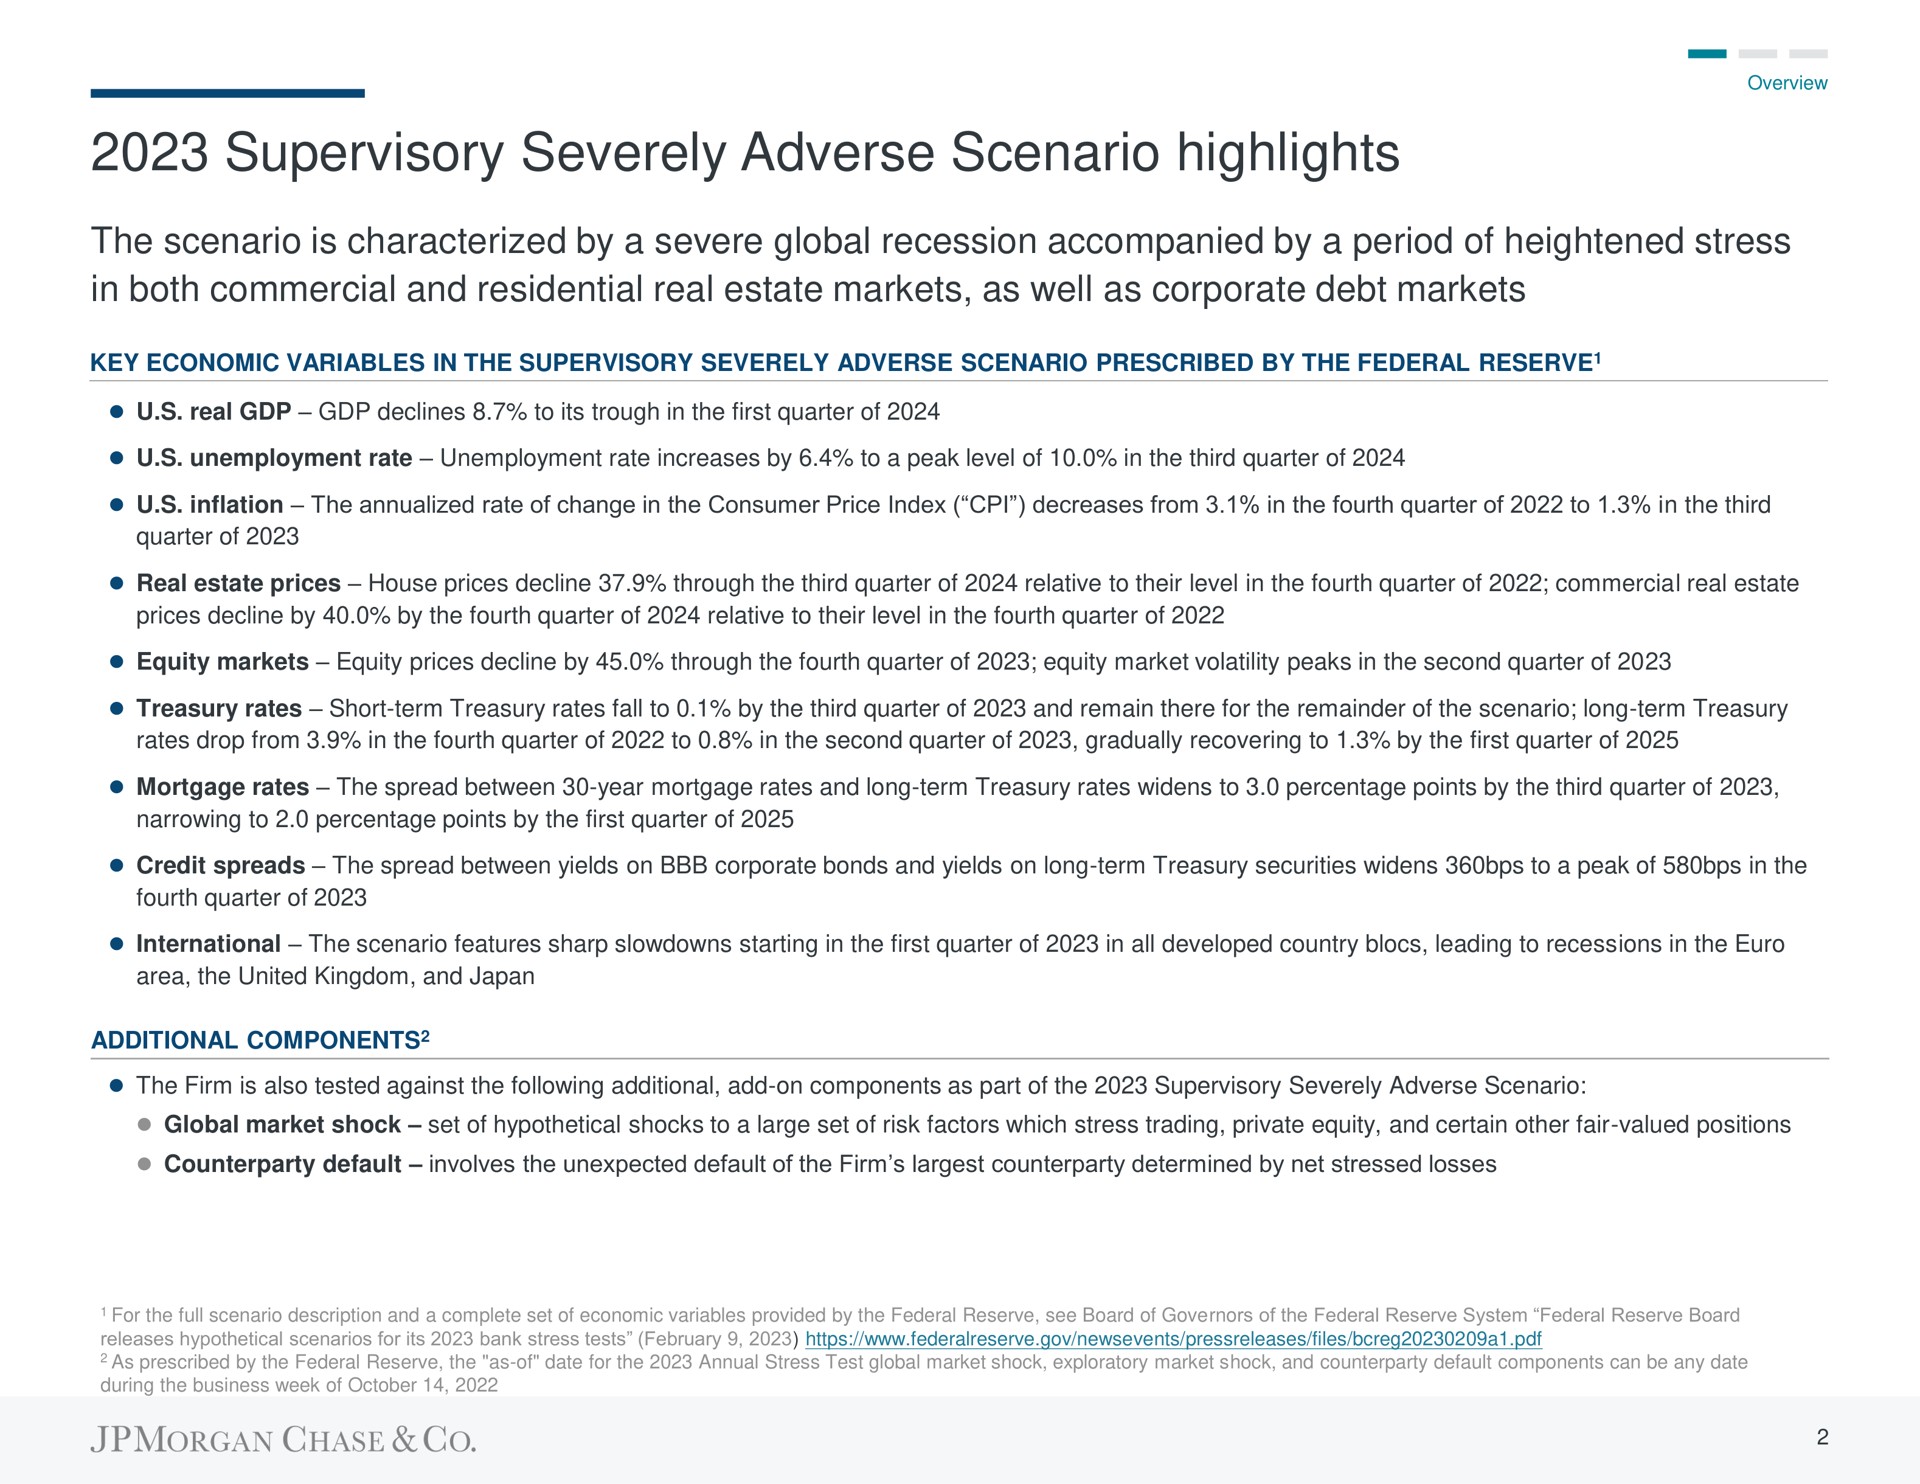 supervisory severely adverse scenario highlights the scenario is characterized by a severe global recession accompanied by a period of heightened stress in both commercial and residential real estate markets as well as corporate debt markets | J.P.Morgan